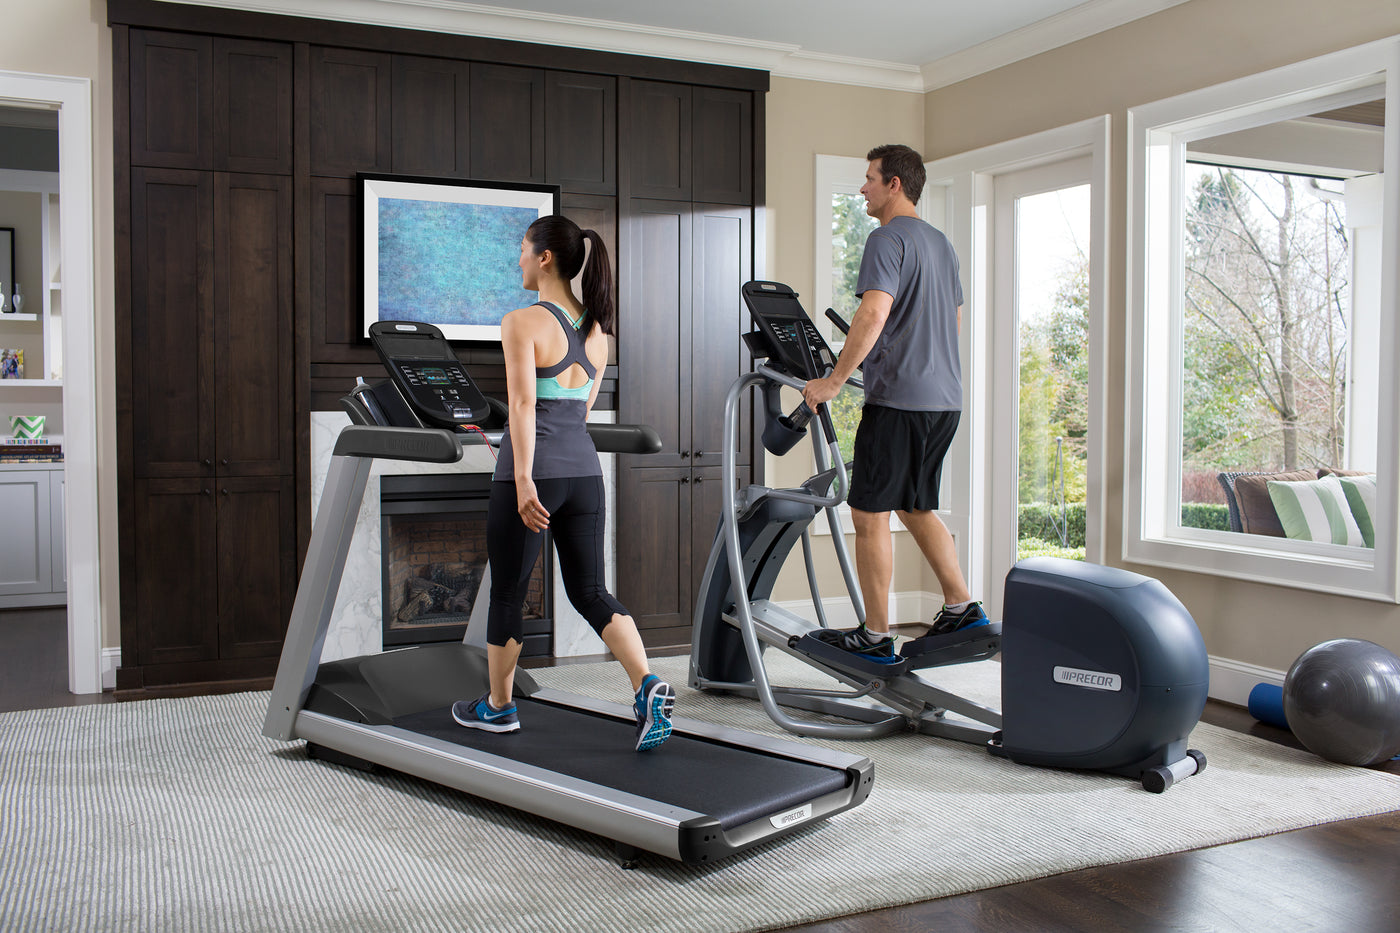 Woman walks on a treadmill, TRM 445, and man is on an elliptical, EFX 447, in their living room